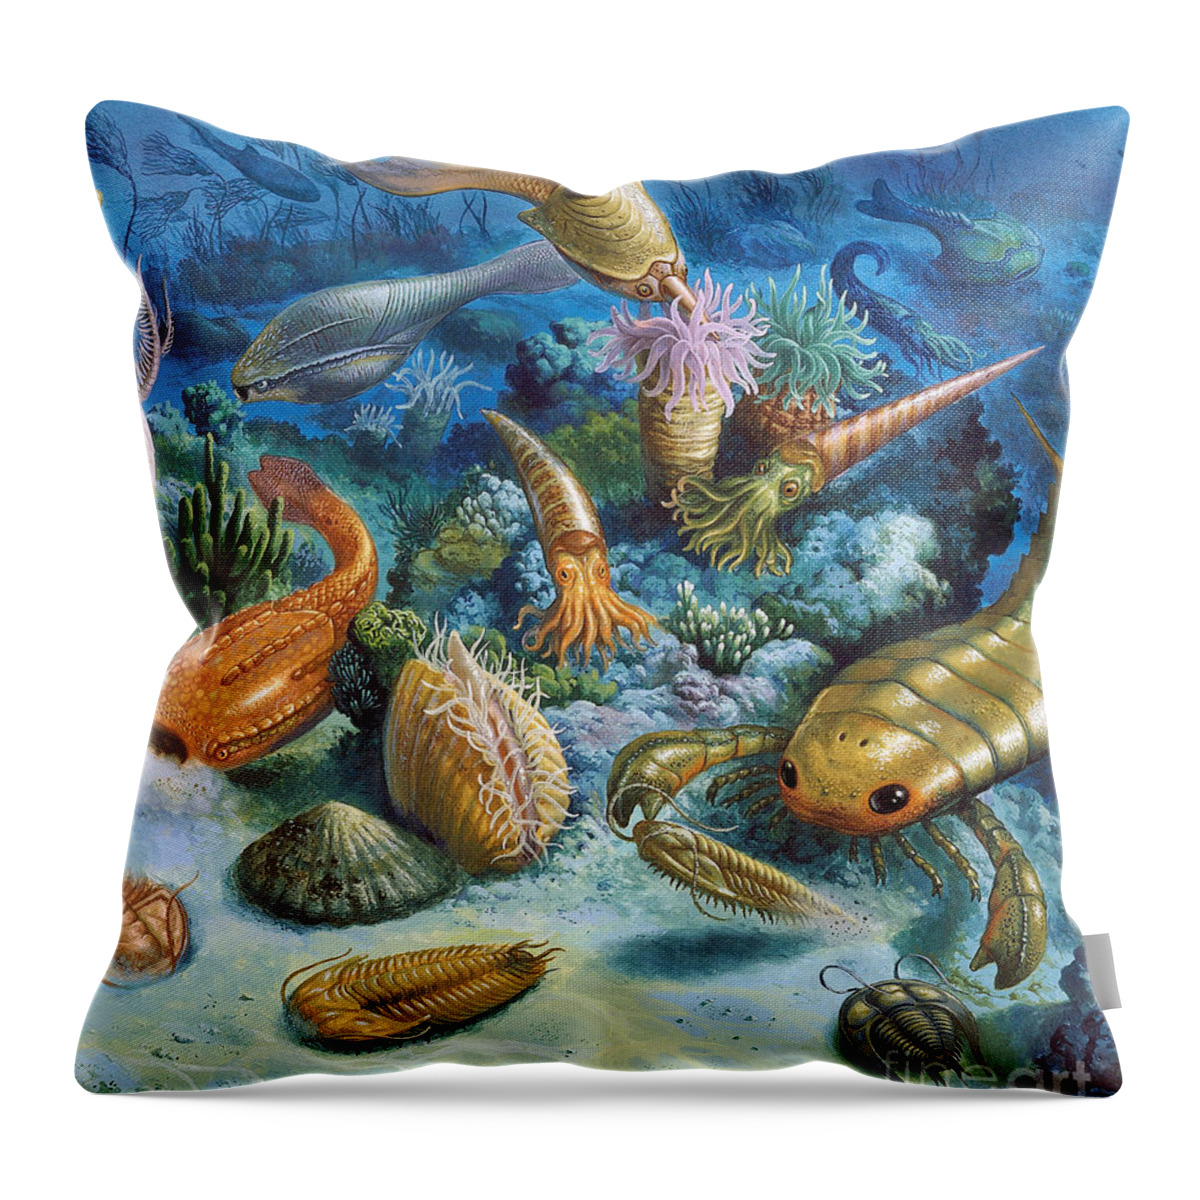 Illustration Throw Pillow featuring the photograph Underwater Life During The Paleozoic by Publiphoto